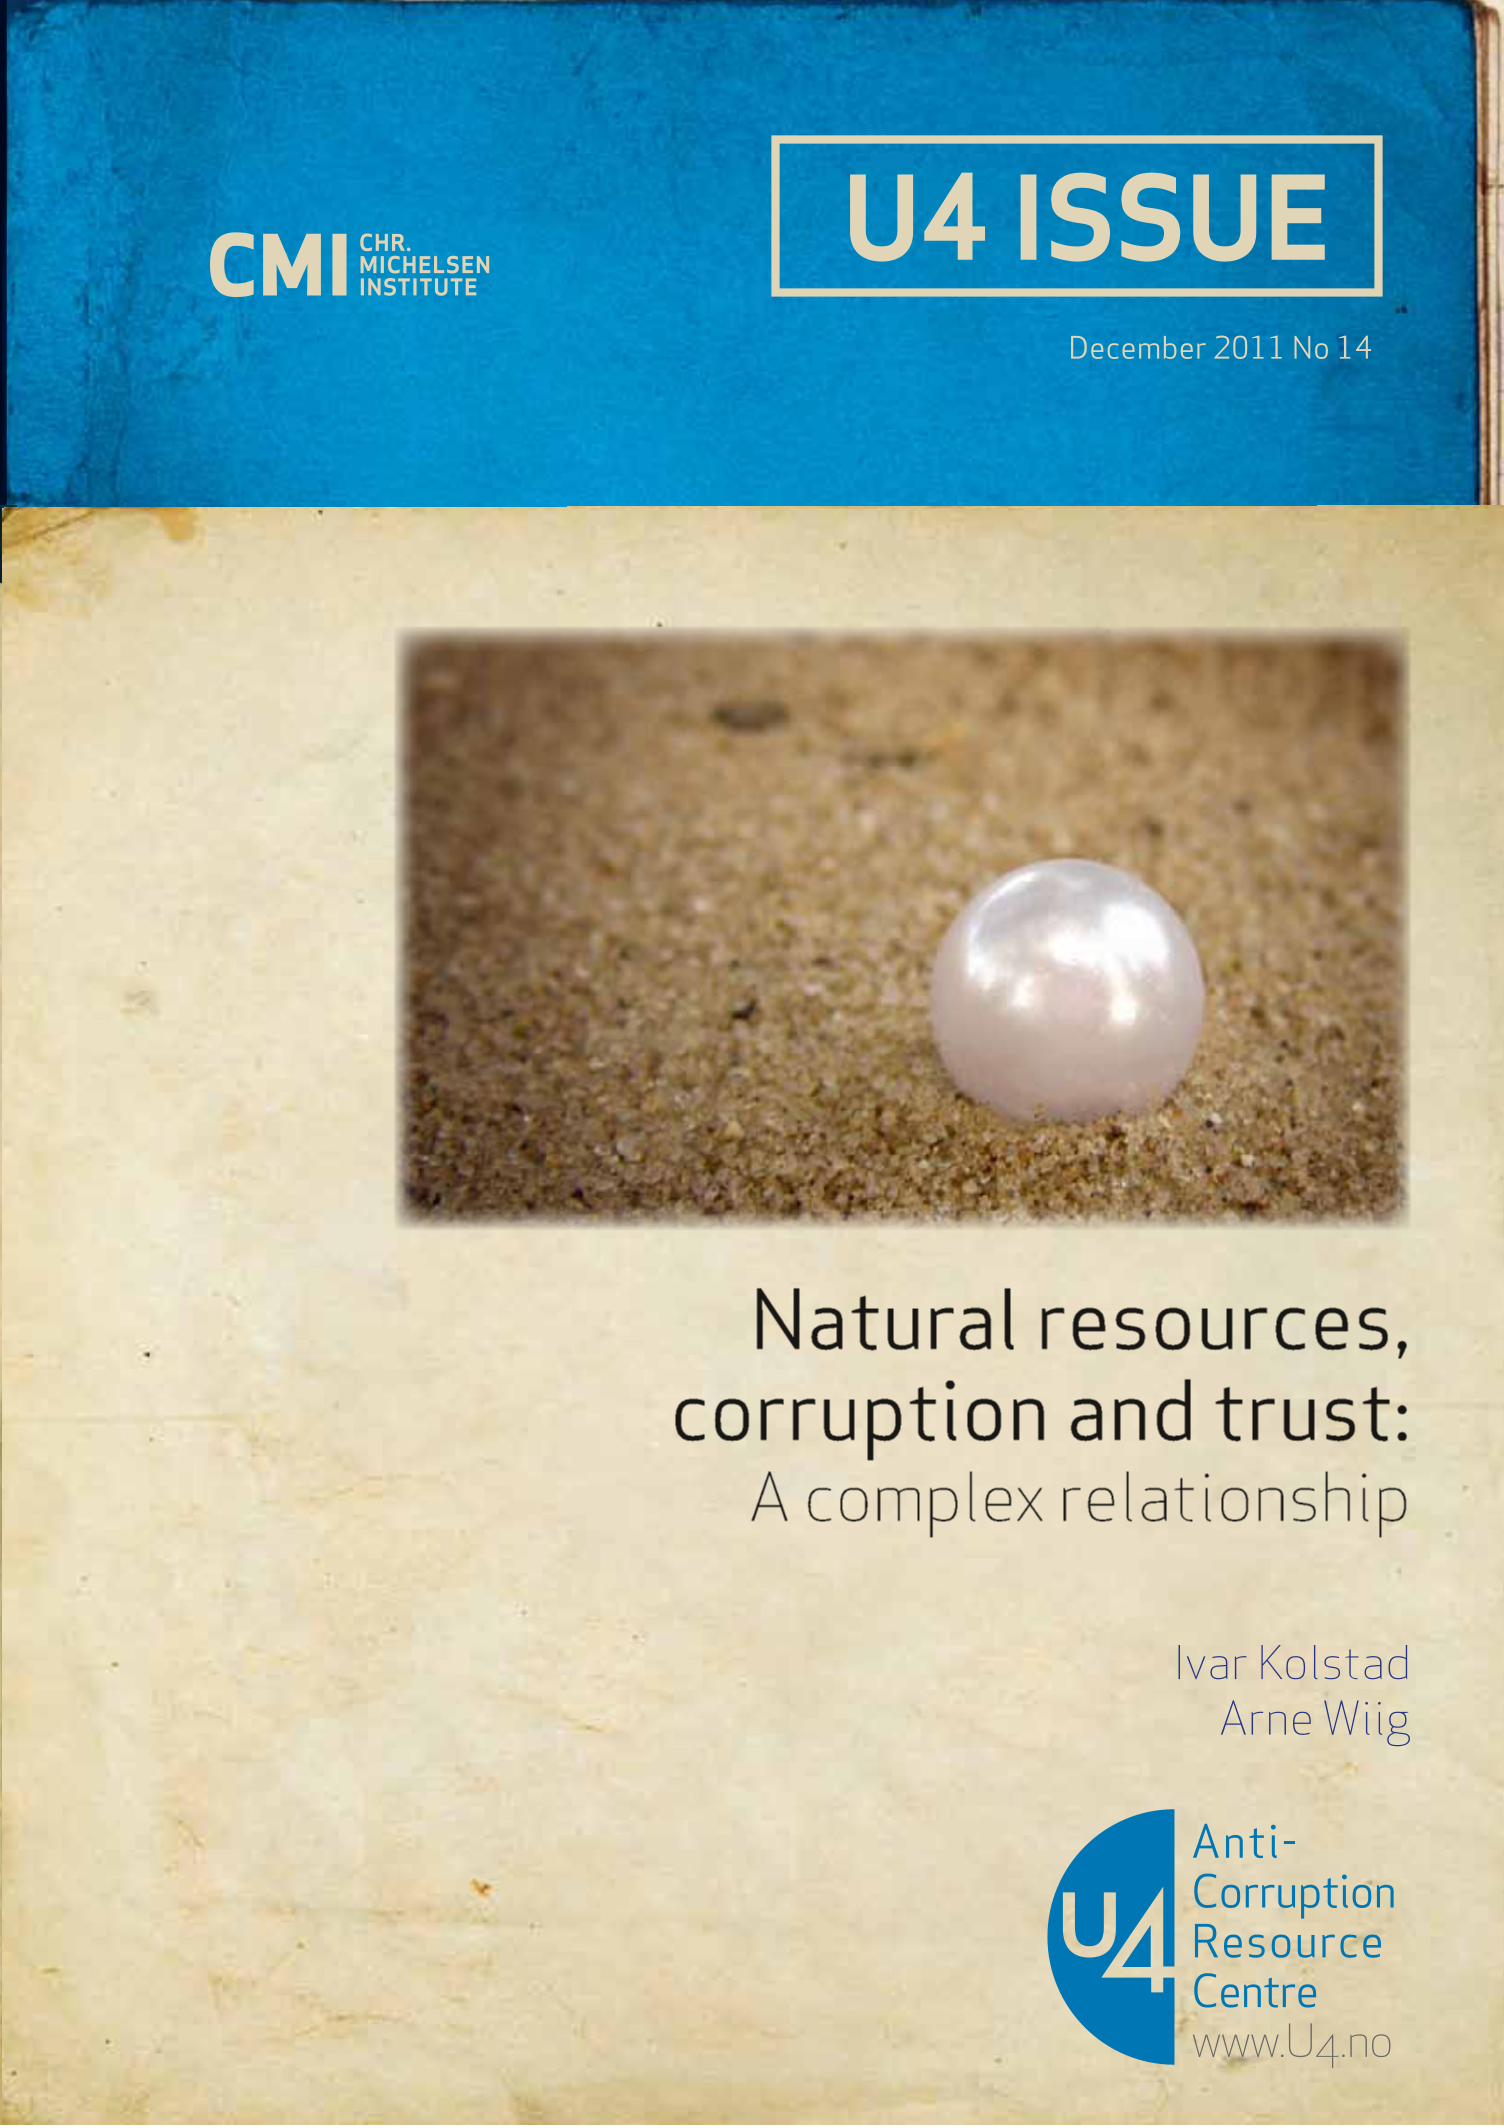 Natural resources, corruption and trust: A complex relationship